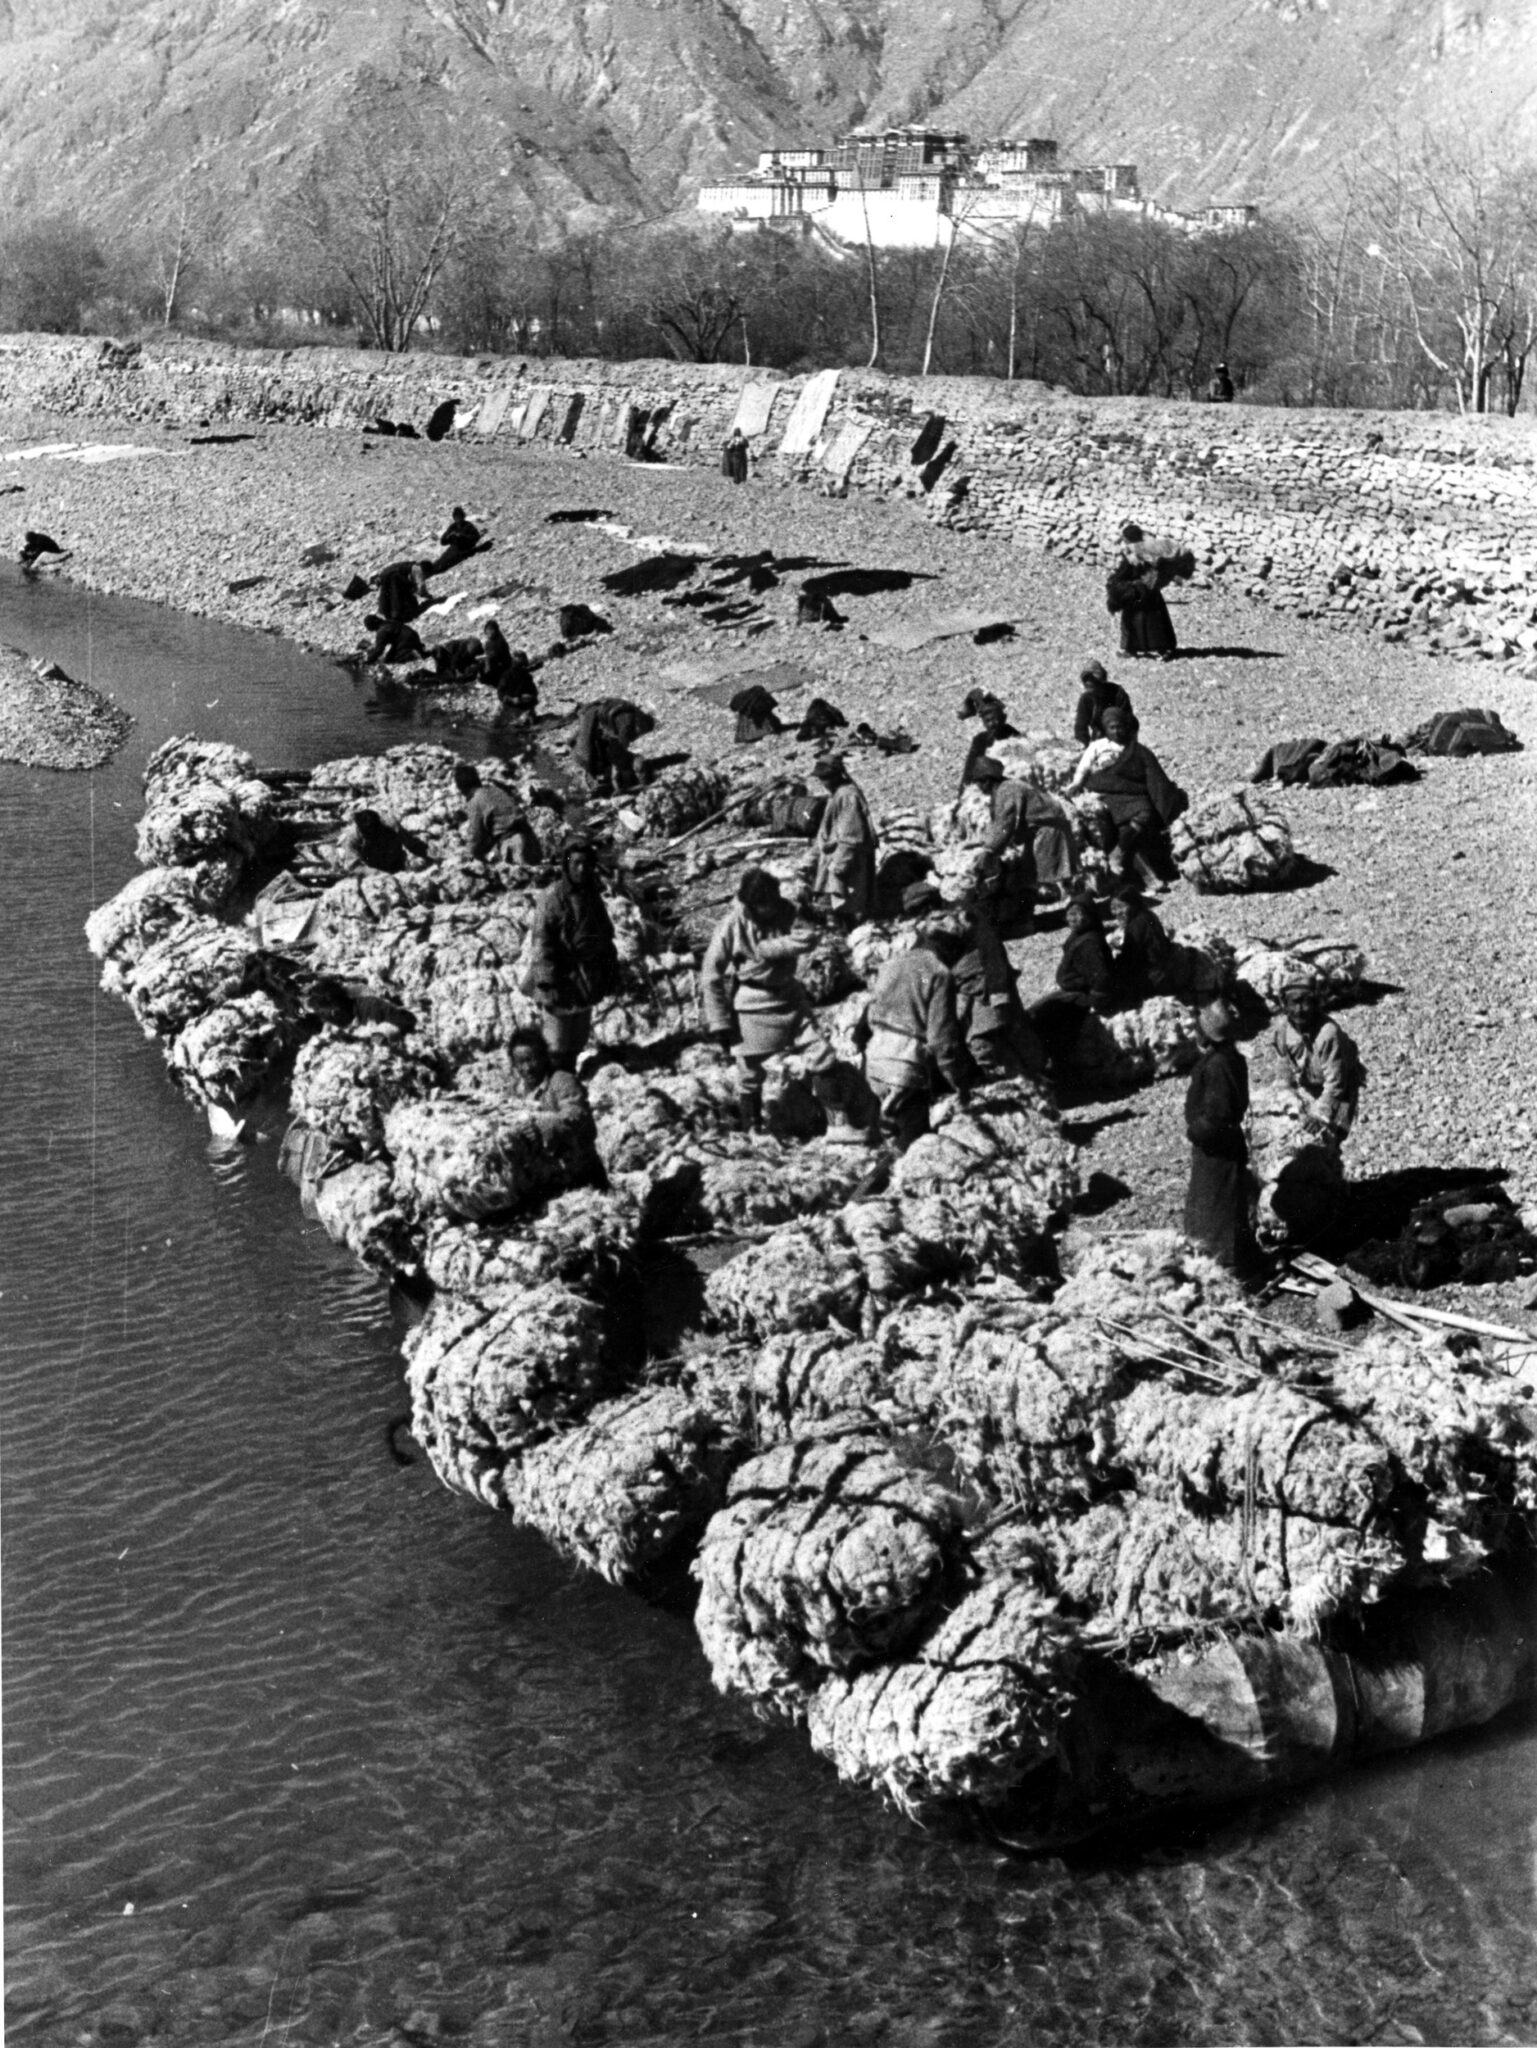 Black and white photograph of people inspecting collection of wool bales floating on water at shoreline